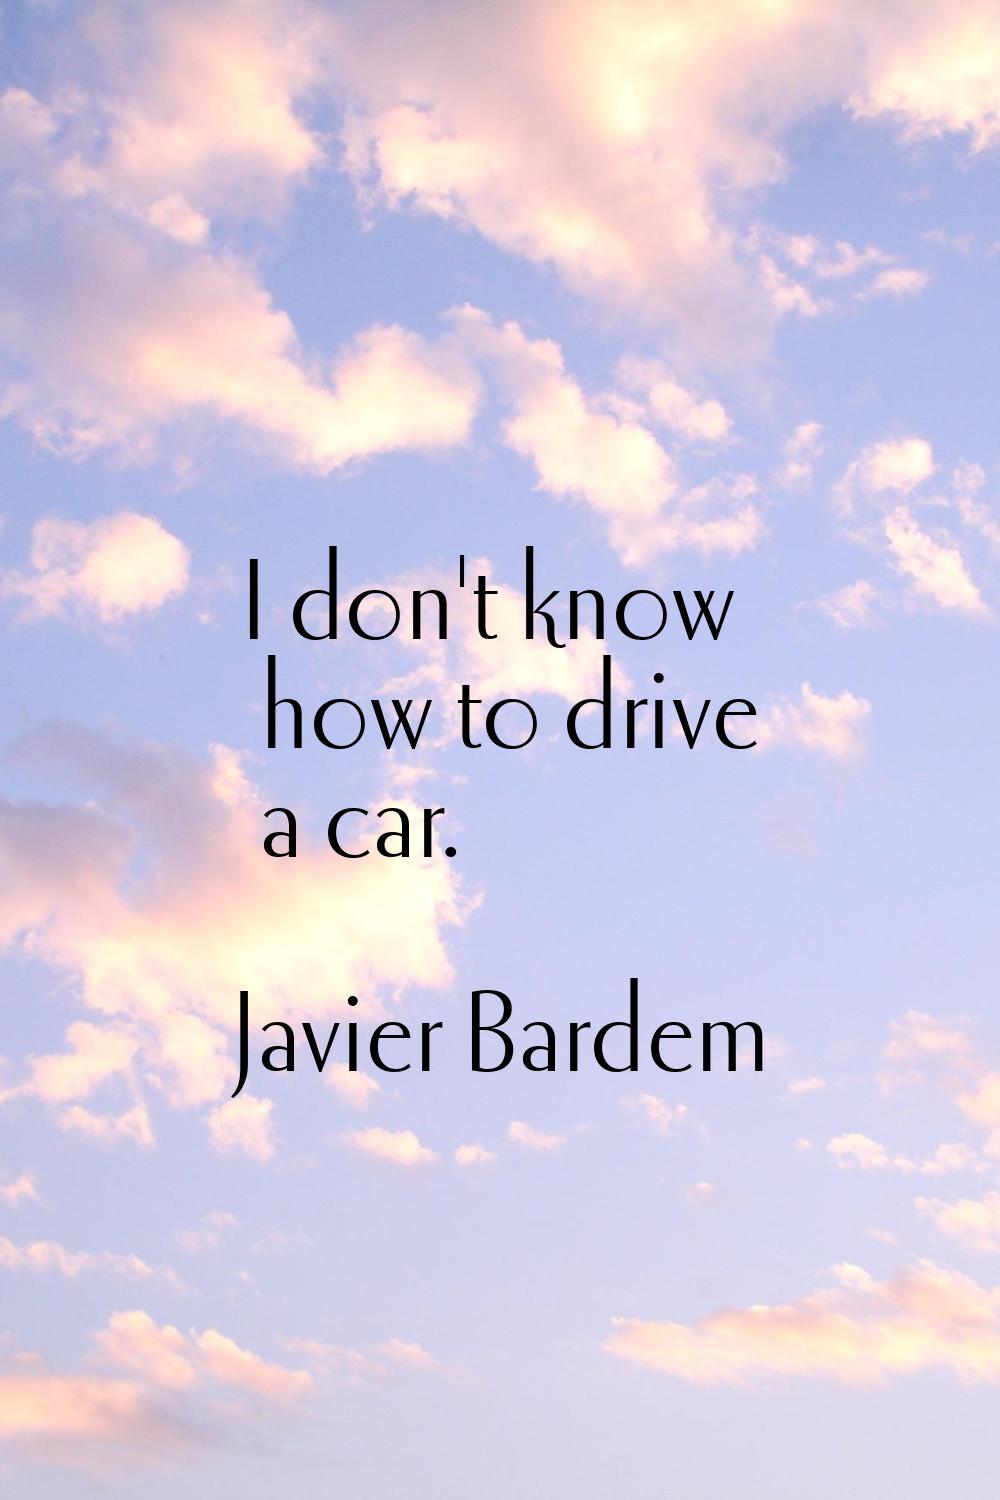 I don't know how to drive a car.